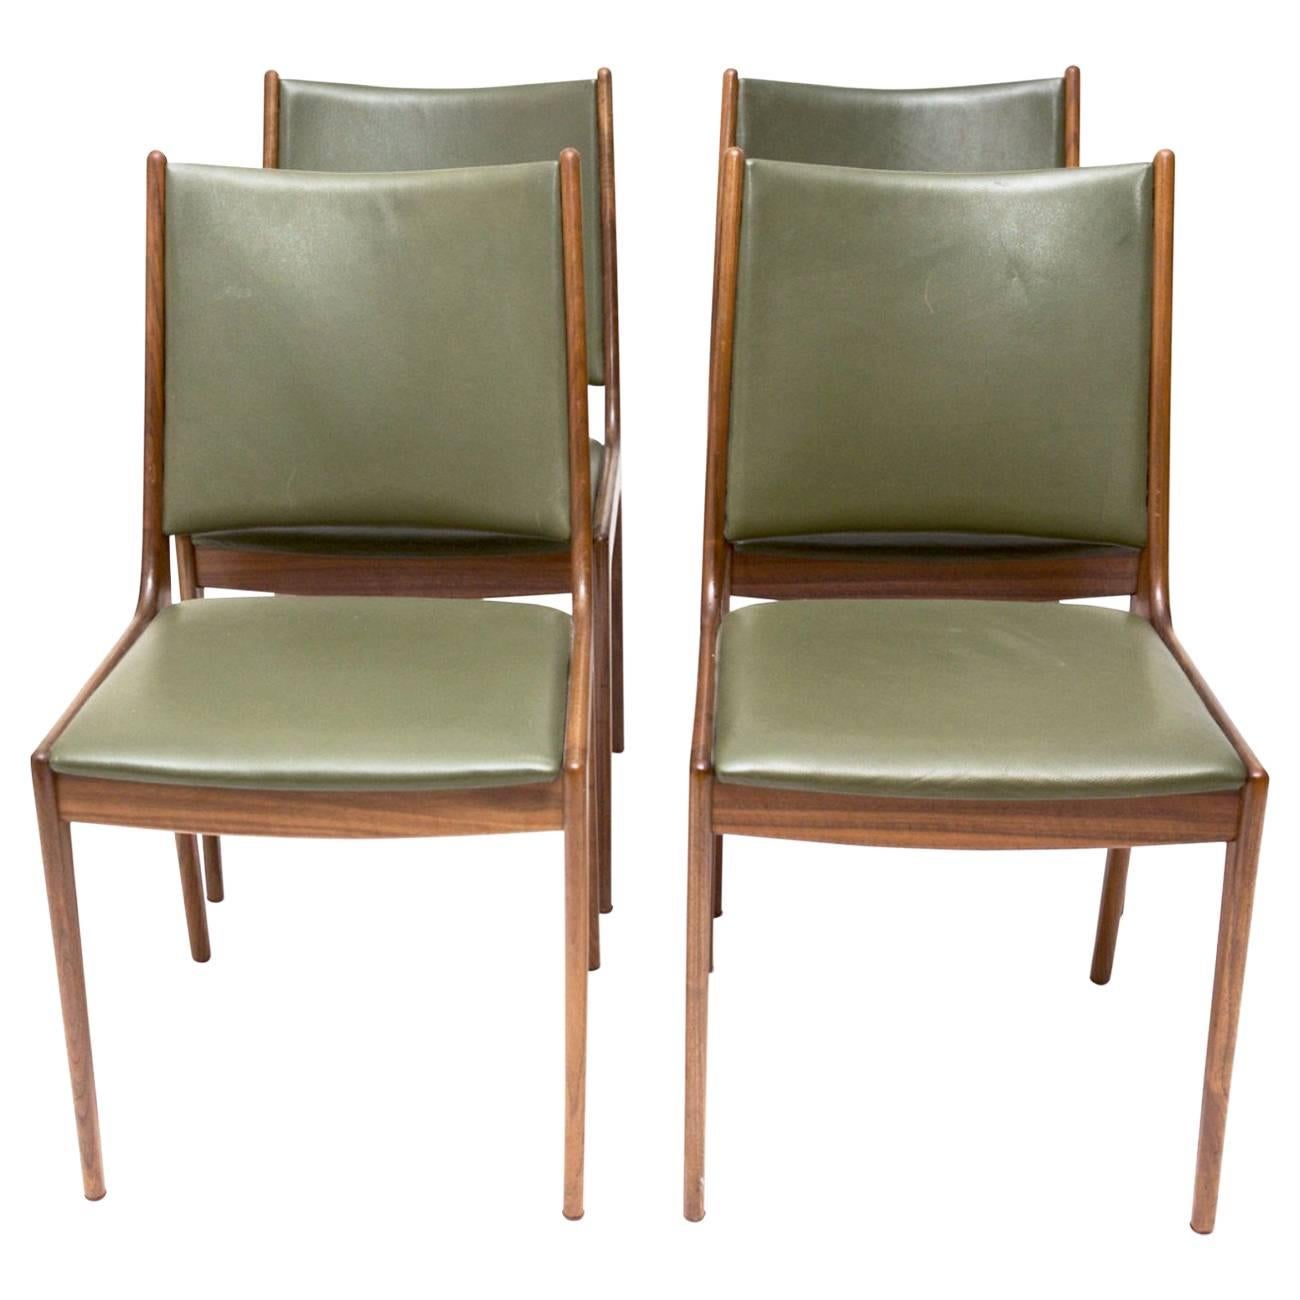 Johannes Andersen Teak Dining Chairs with Green Leather